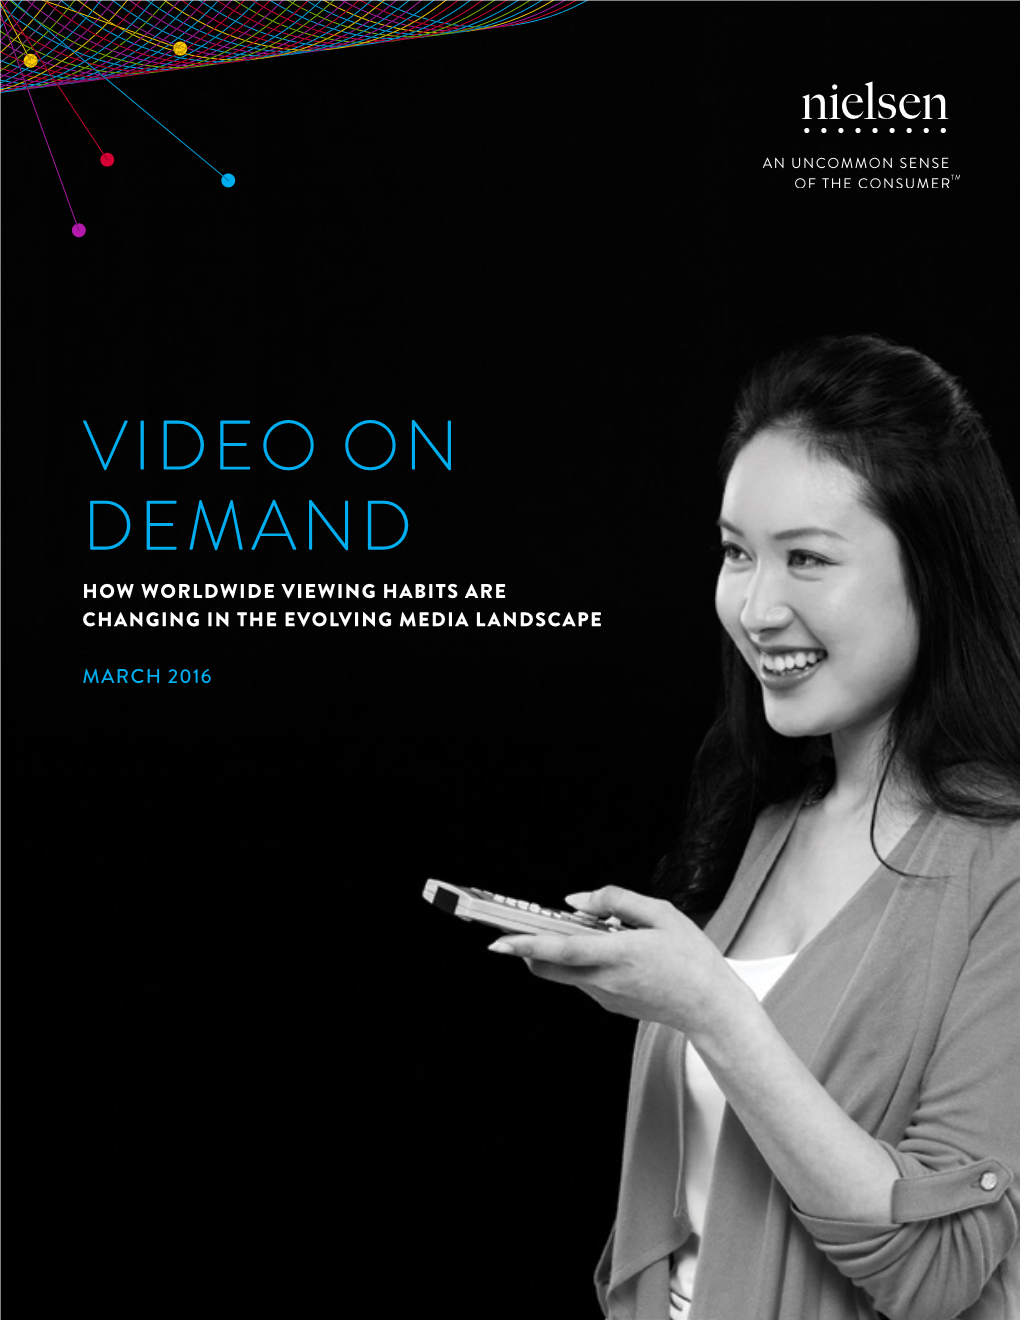 Video on Demand How Worldwide Viewing Habits Are Changing in the Evolving Media Landscape